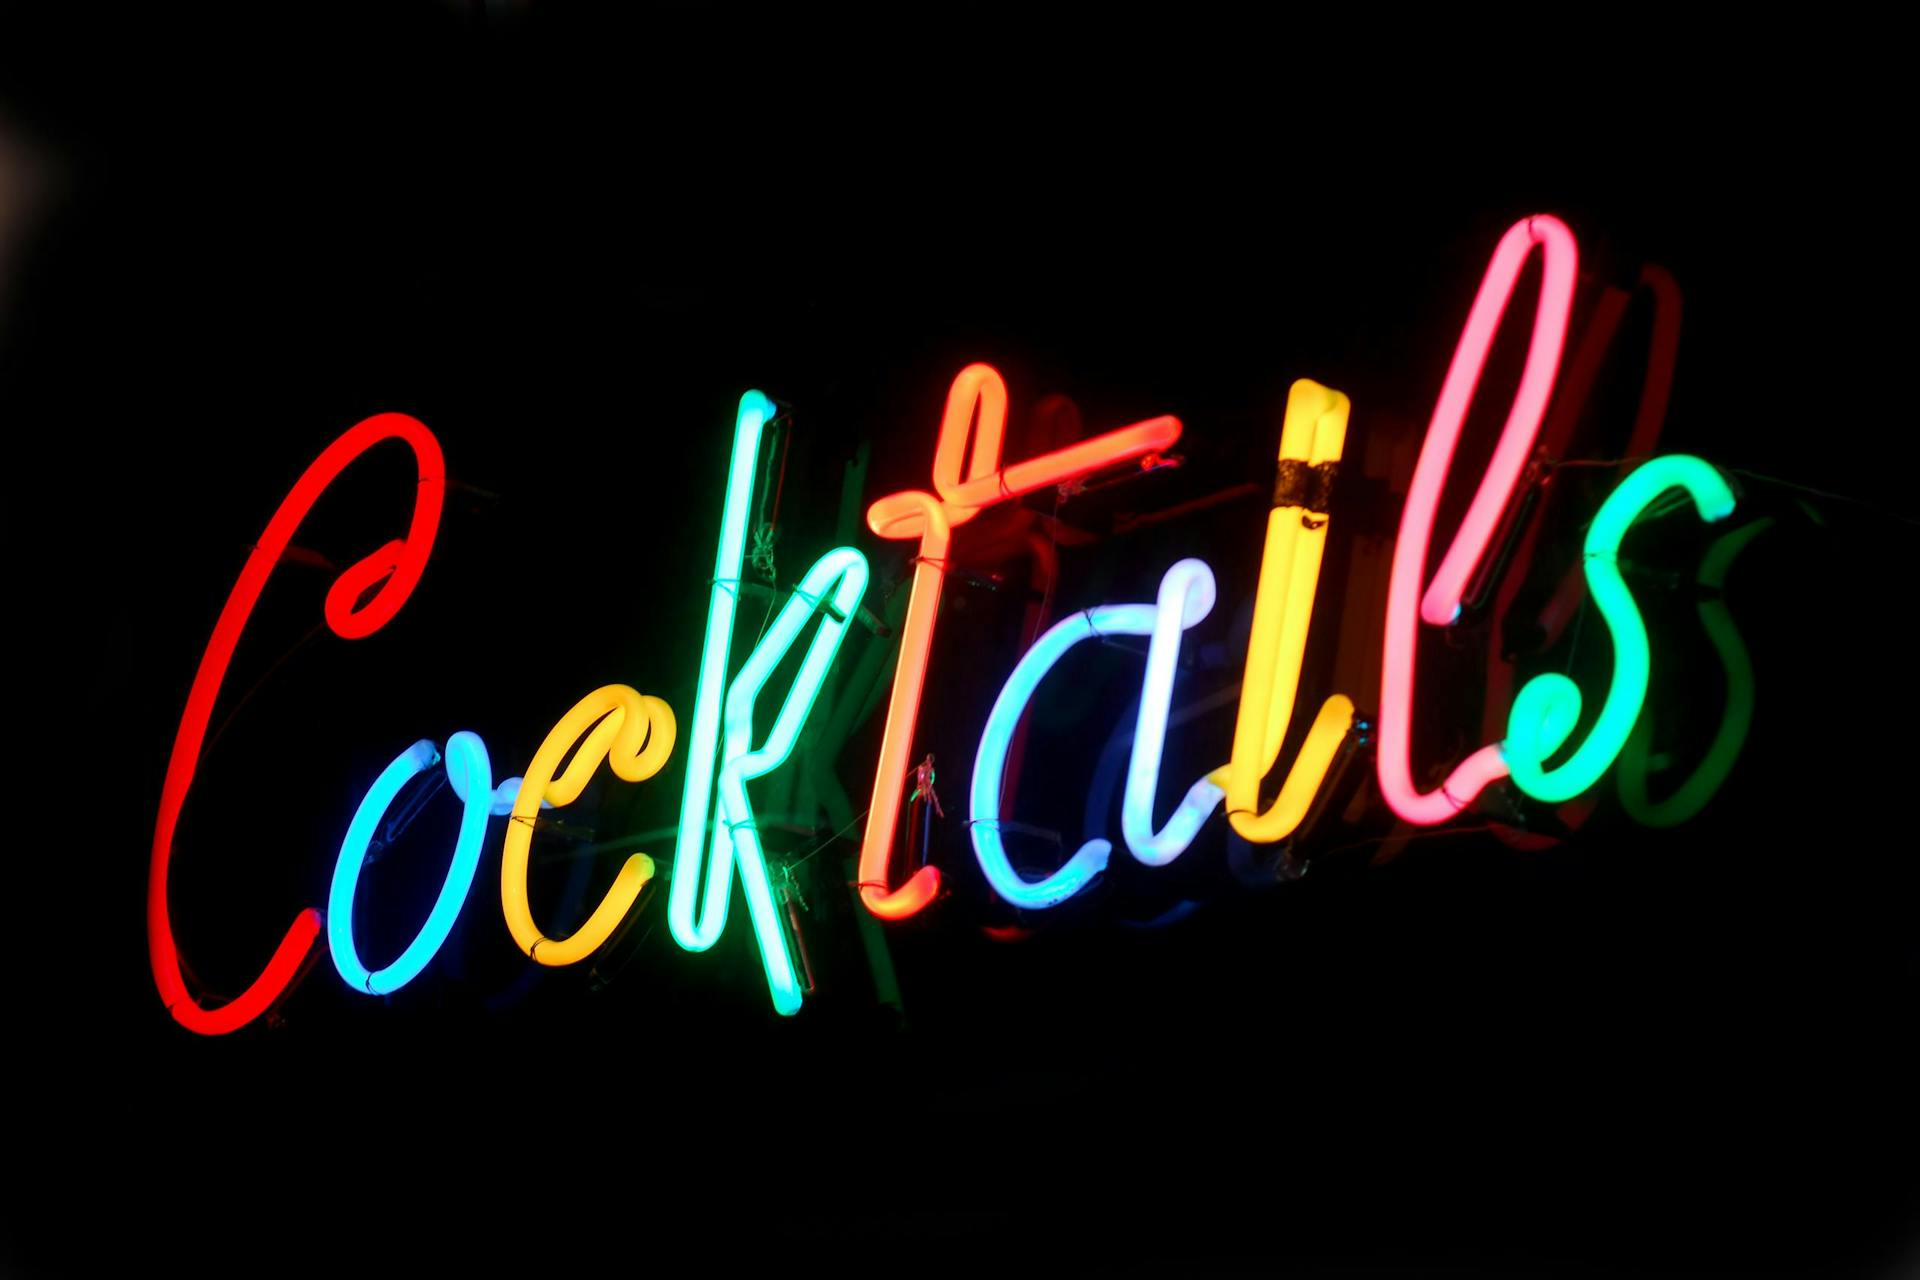 FROM RETRO CLOTHING TO BRIGHT NEON SIGNS: YOUNG PEOPLE REDISCOVER THE CHARM OF VINTAGE 